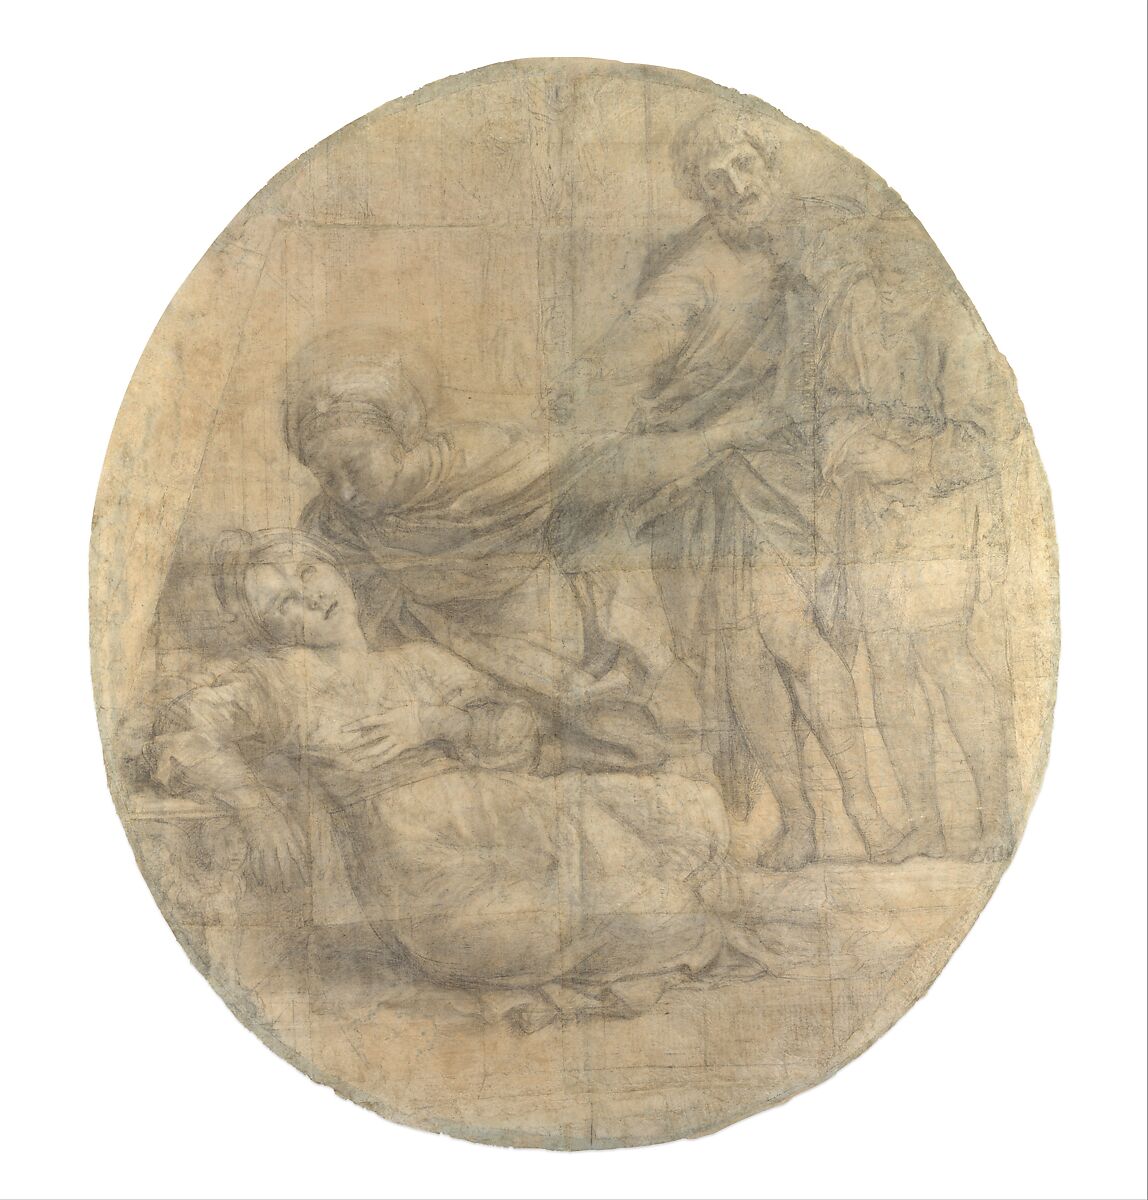 The Martyrdom of Saint Cecilia (Cartoon for a Fresco), Domenichino (Domenico Zampieri) (Italian, Bologna 1581–1641 Naples), Charcoal highlighted with white chalk on fourteen sheets of blue laid paper, two of the sheets cut from elsewhere on the original cartoon and reset at the left and right margins to make up the oval 